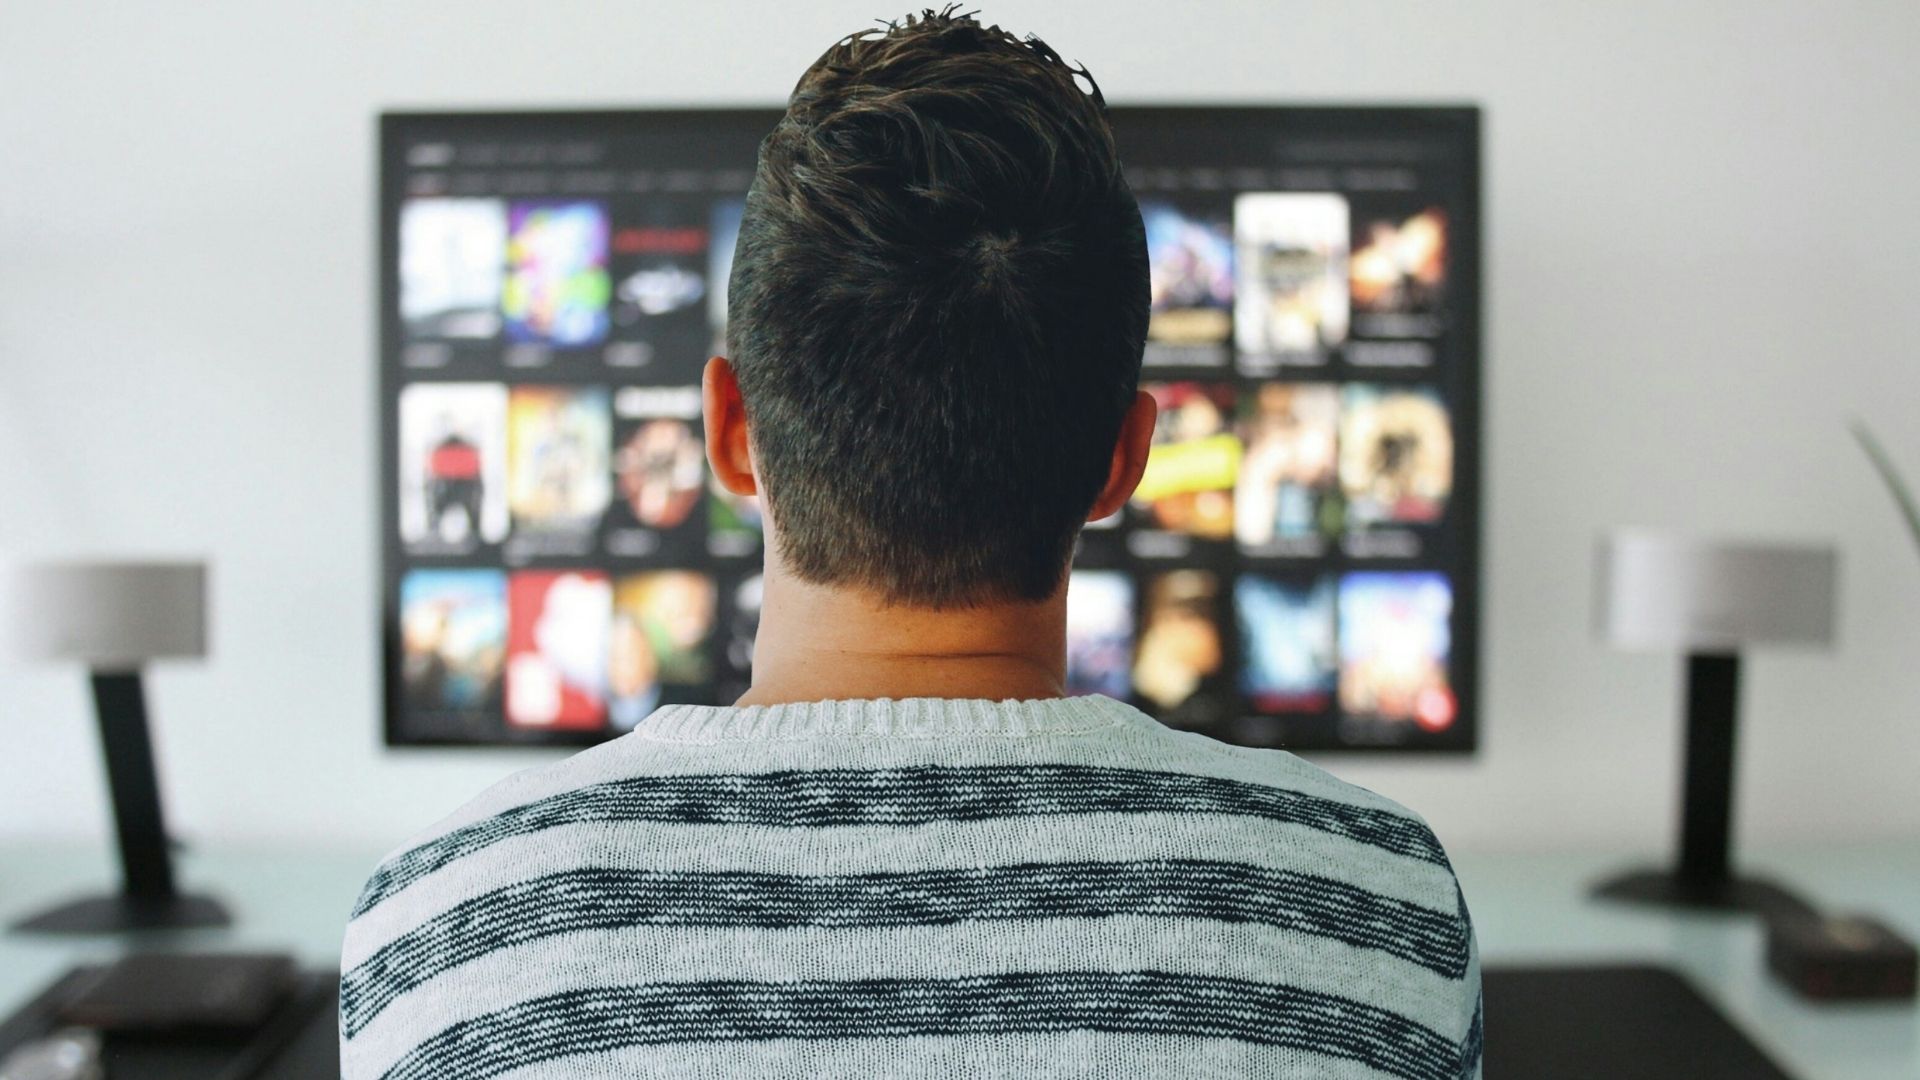 Americans plan to spend more time streaming, Vizio goes public, and other top news